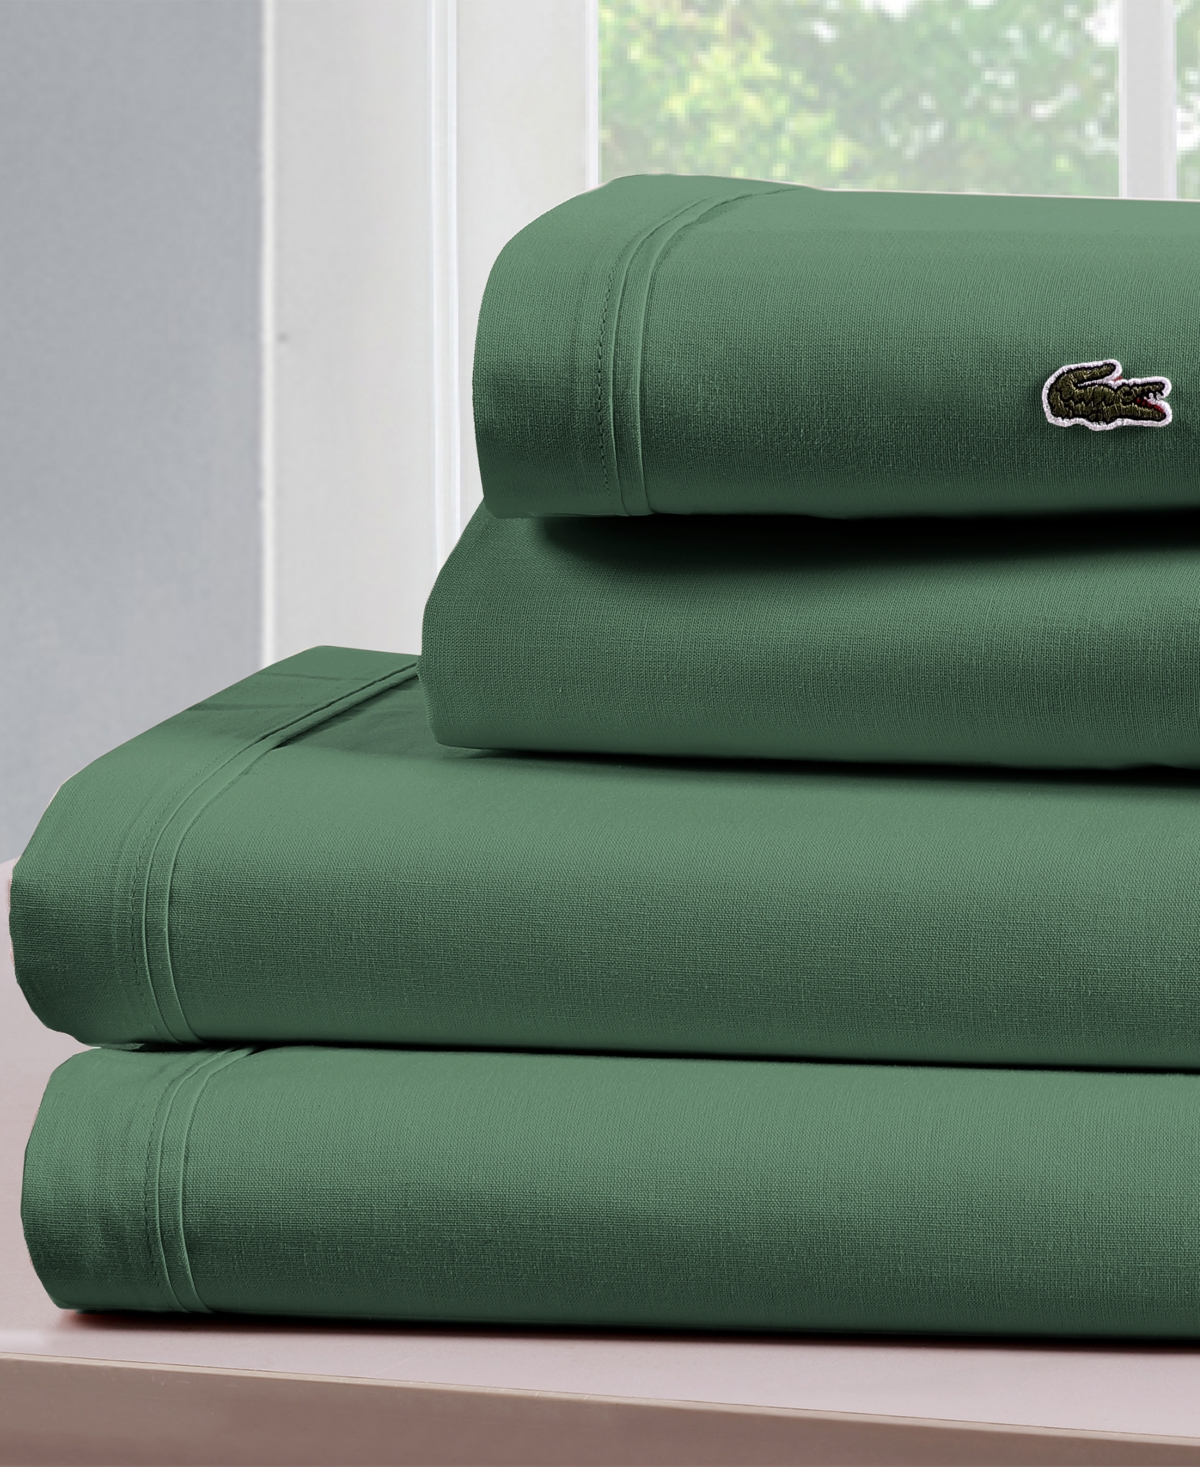 Lacoste Home Solid Cotton Percale Sheet Set, Twin Xl In Ivy Green